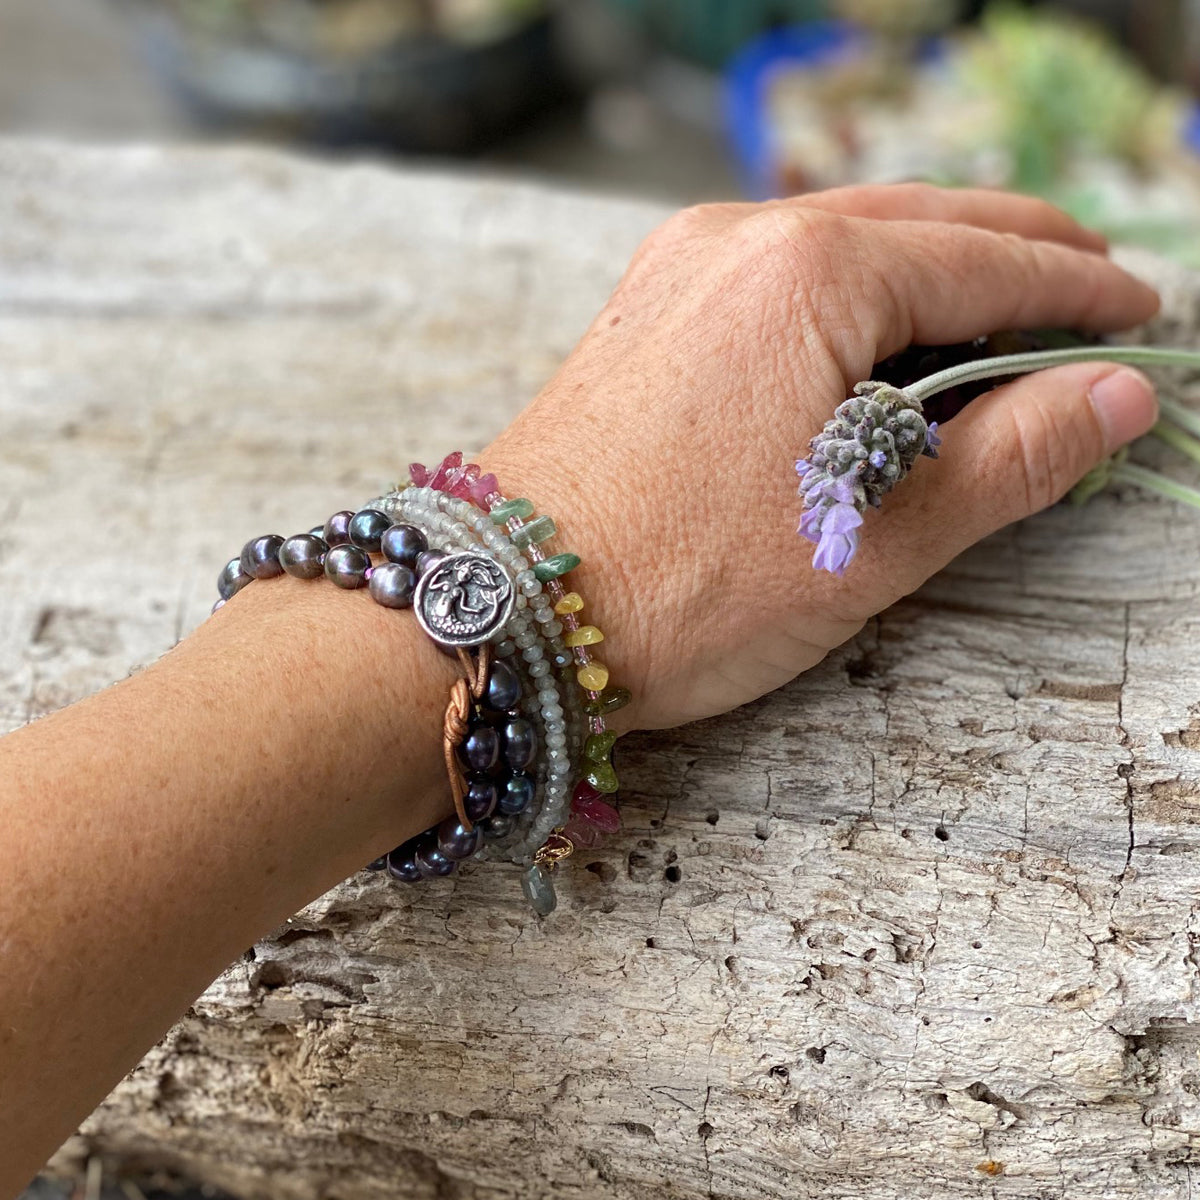 Ocean inspired jewelry: Mermaid Soul Bracelet Combo - Fresh Water Pearl and Leather Wrap Bracelet with Mermaid Button, Emotional Healing Rainbow Chakra Tourmaline Bracelet for Self Love, Labradorite Wrap Bracelet for a Positive Change in Your Life.